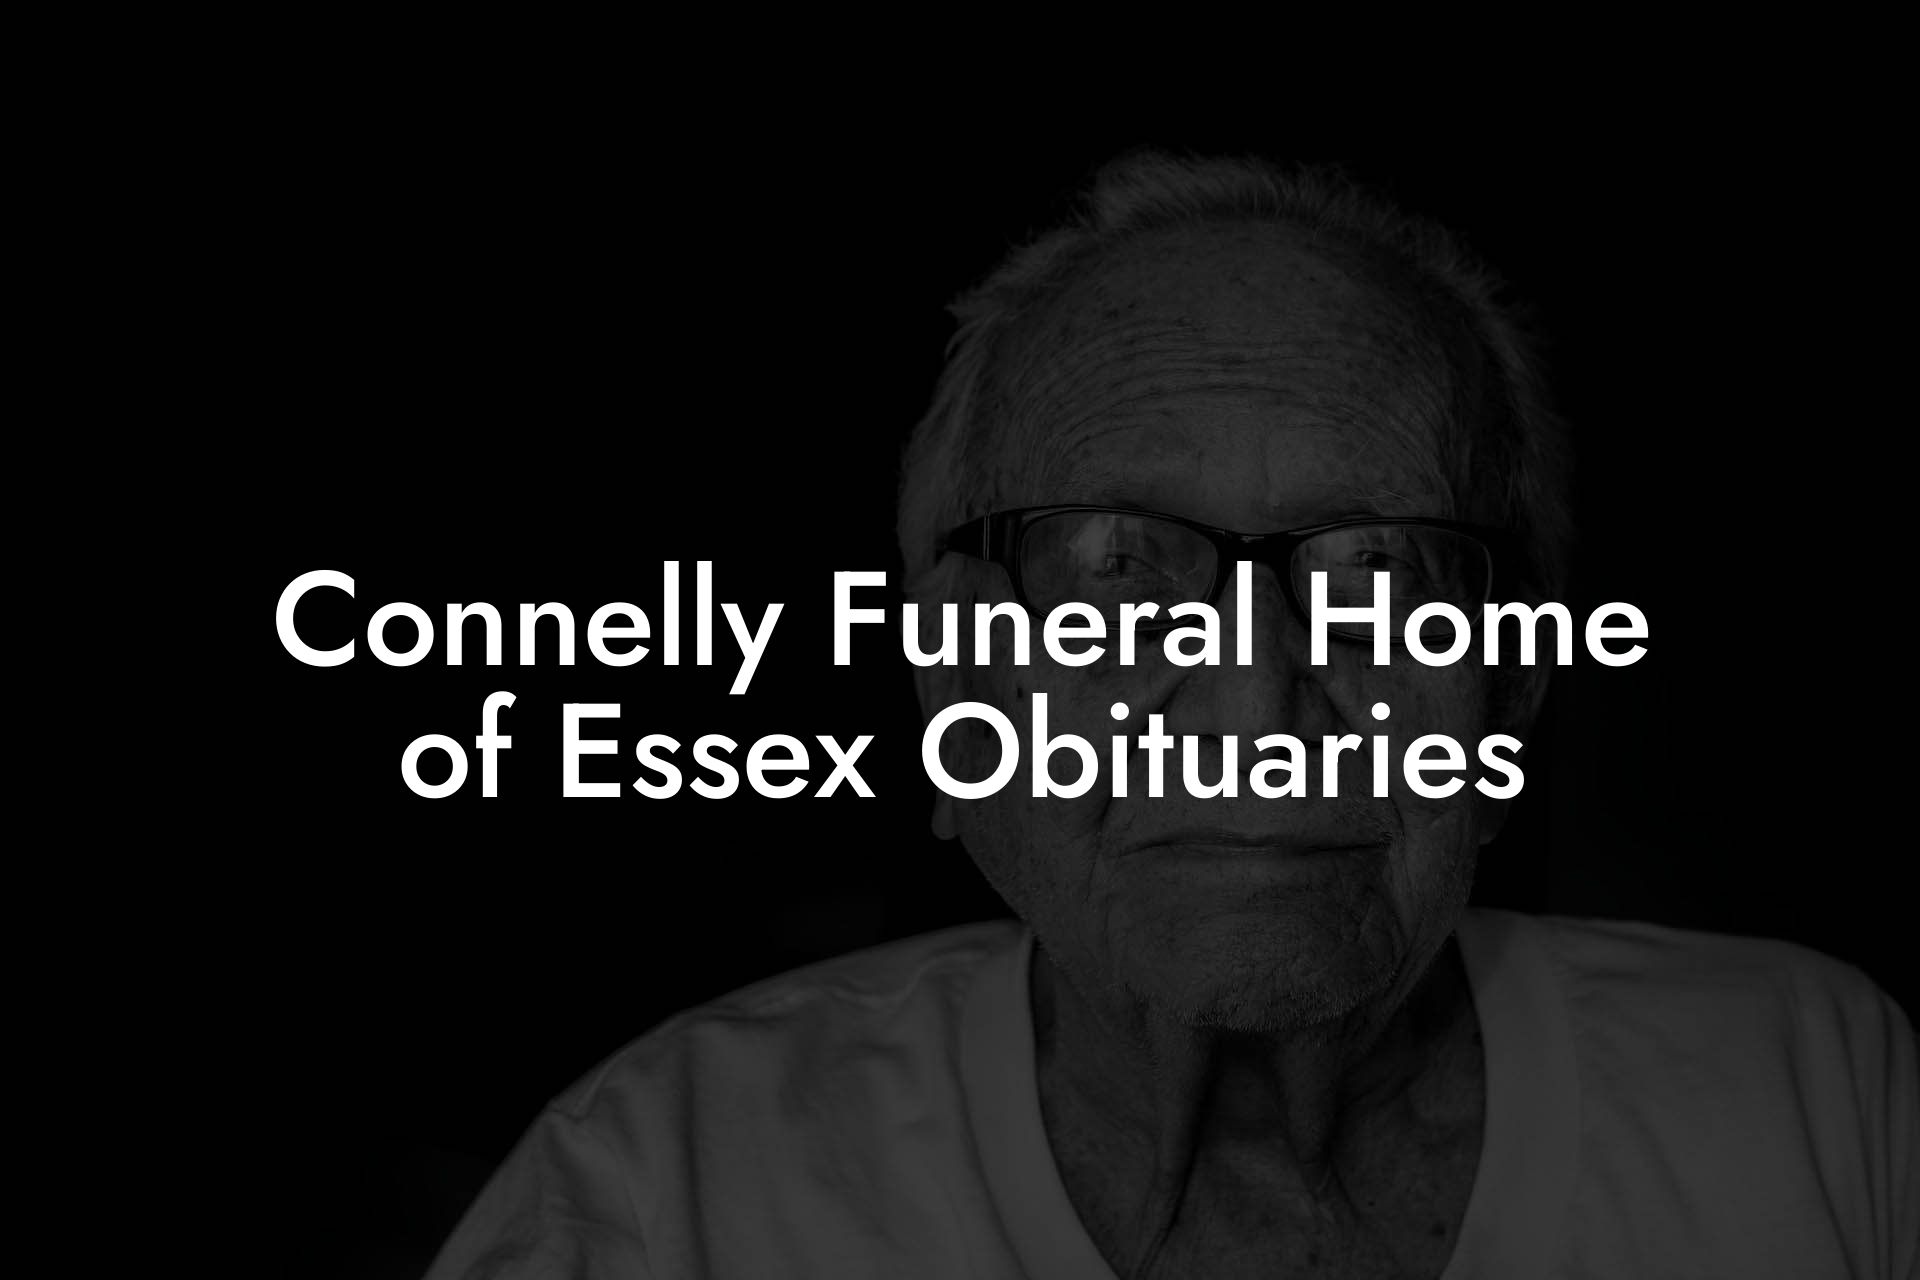 Connelly Funeral Home of Essex Obituaries